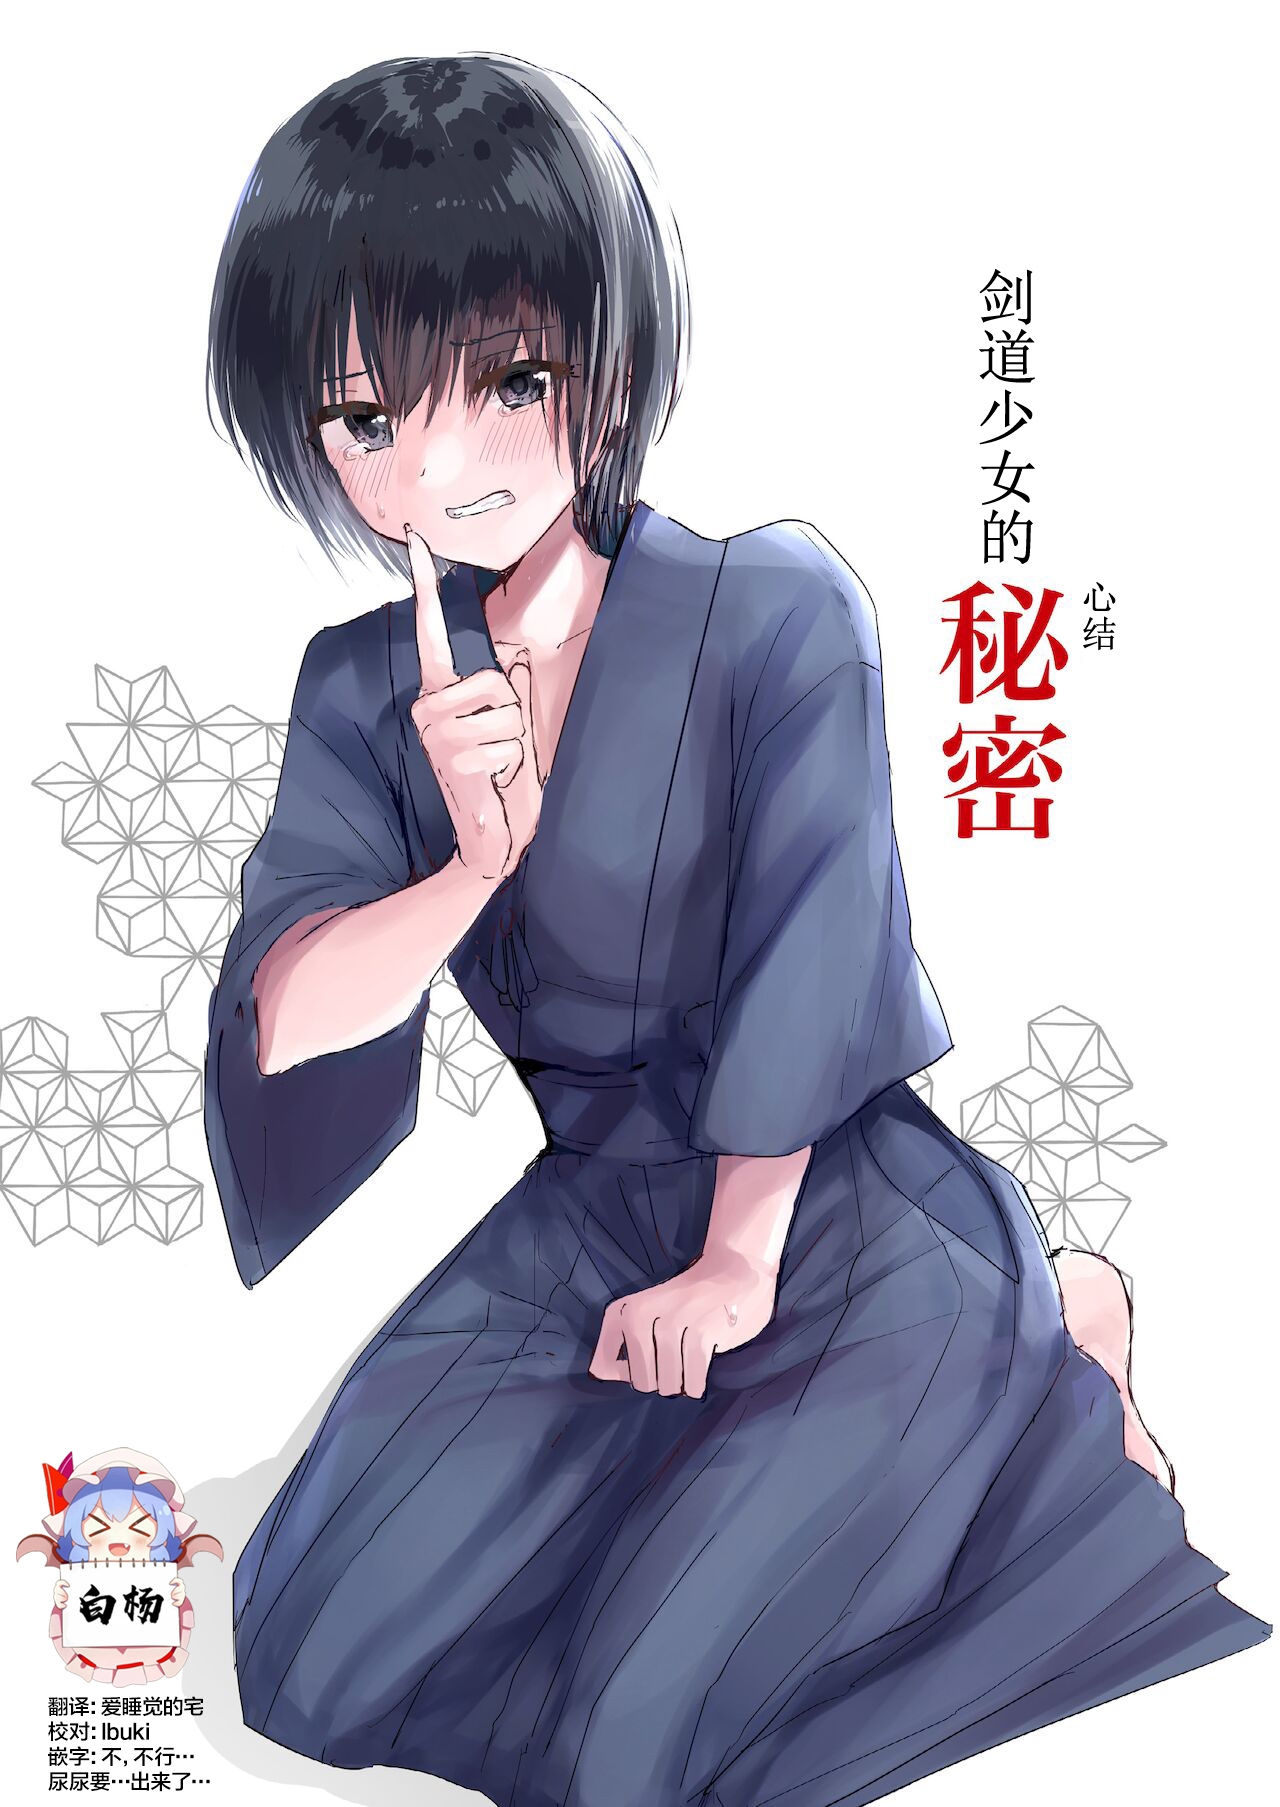 [Happiness (Isoi)] Kendo Shoujo no Complex [Chinese] [白杨汉化组] 0